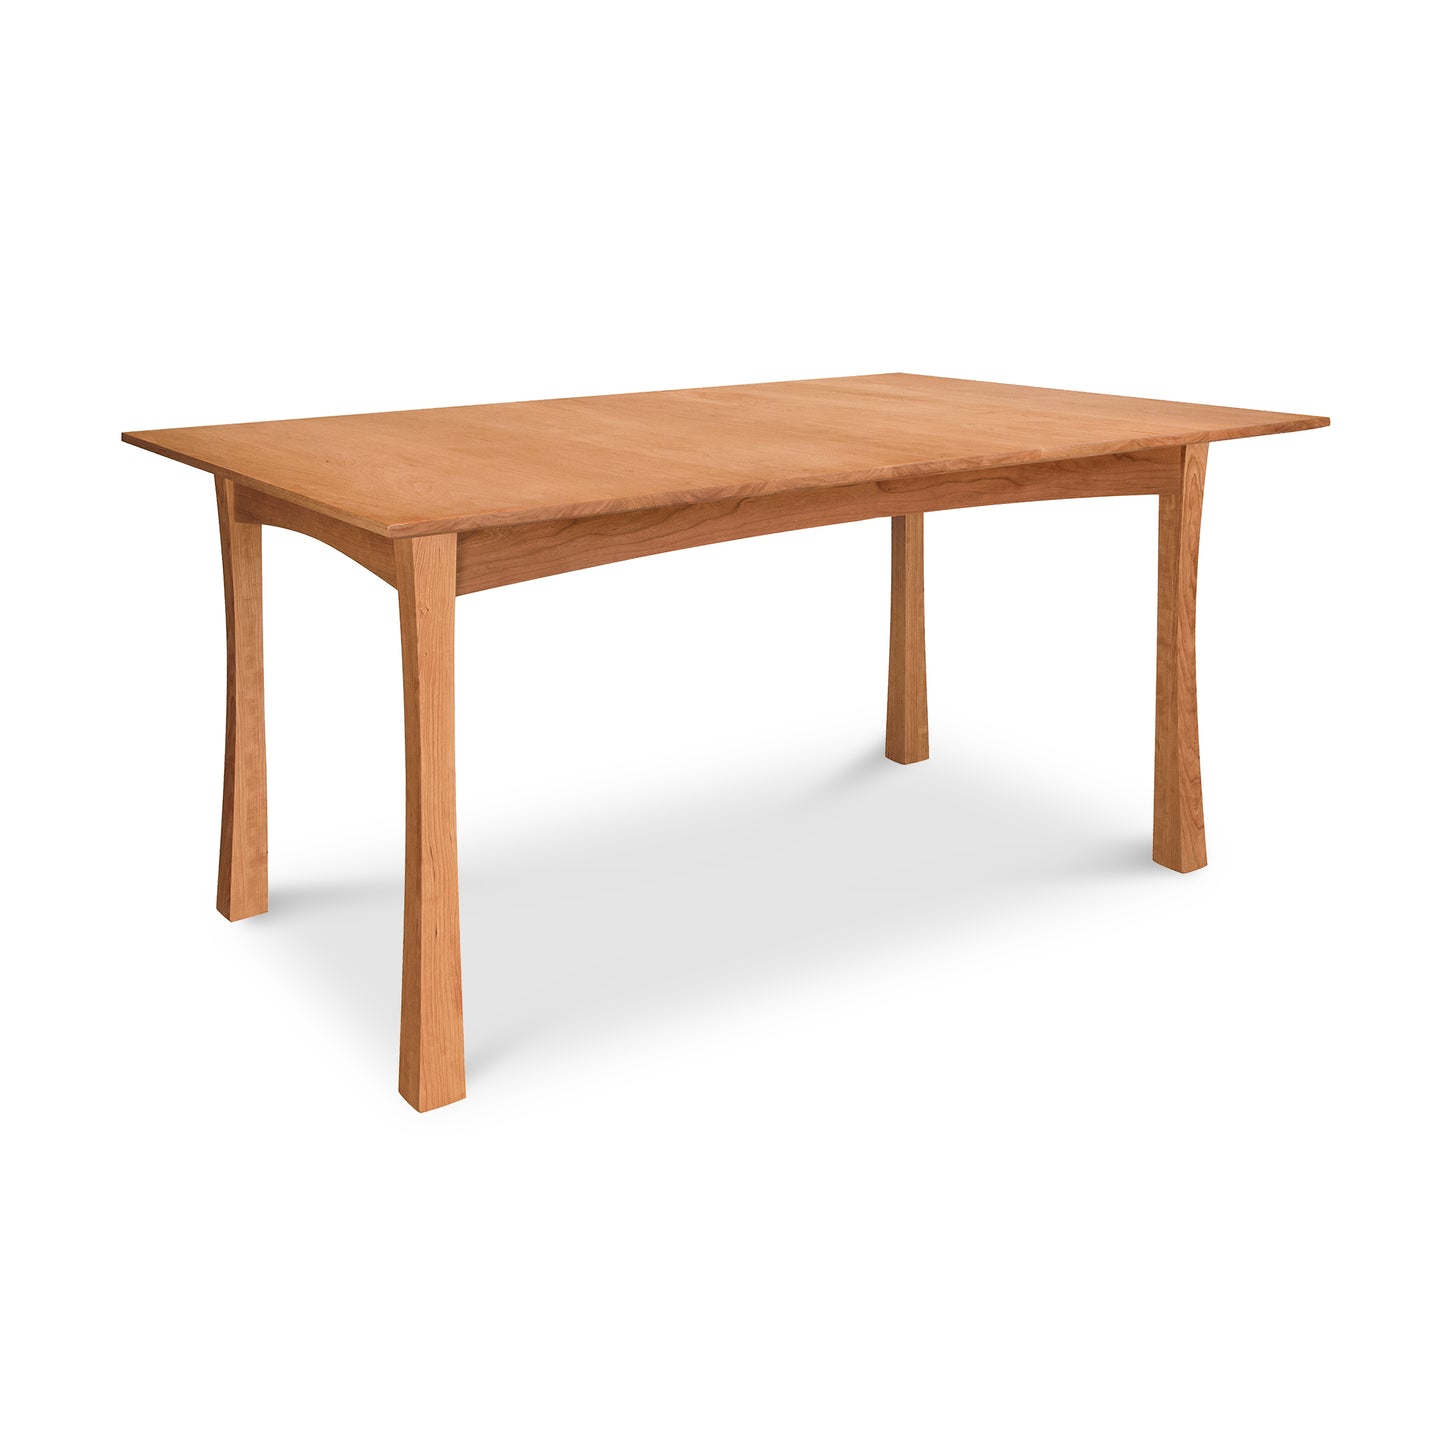 A Vermont Furniture Designs Contemporary Craftsman Solid Top Dining Table with four legs, crafted by Vermont woodworkers, on a white background.